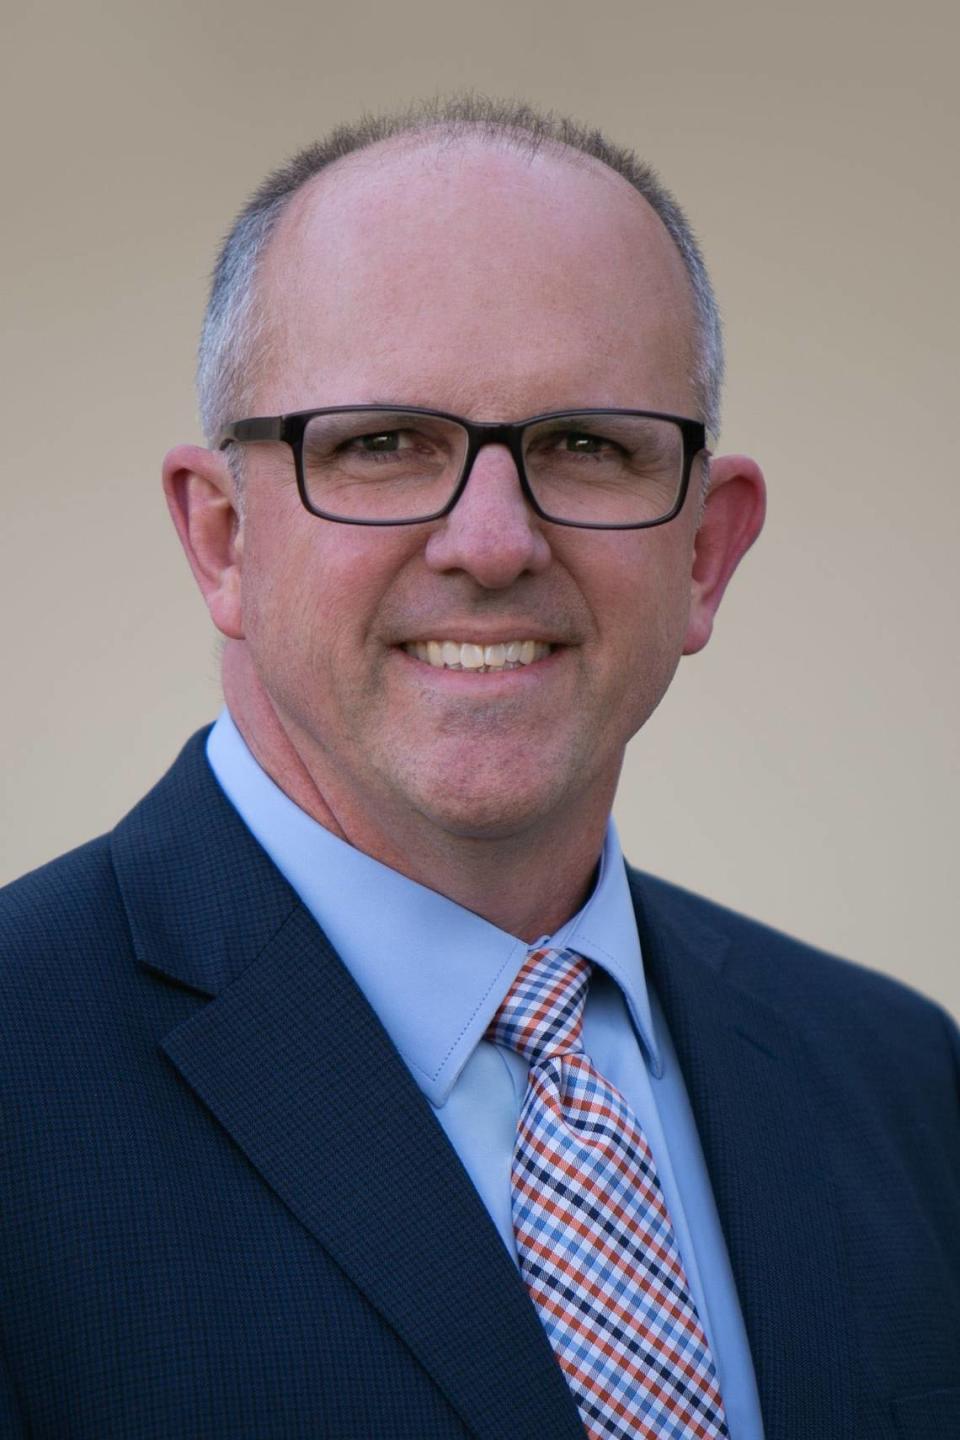 Dr. Brian Sanders is one of four finalists in the search for the next Modesto Junior College president.